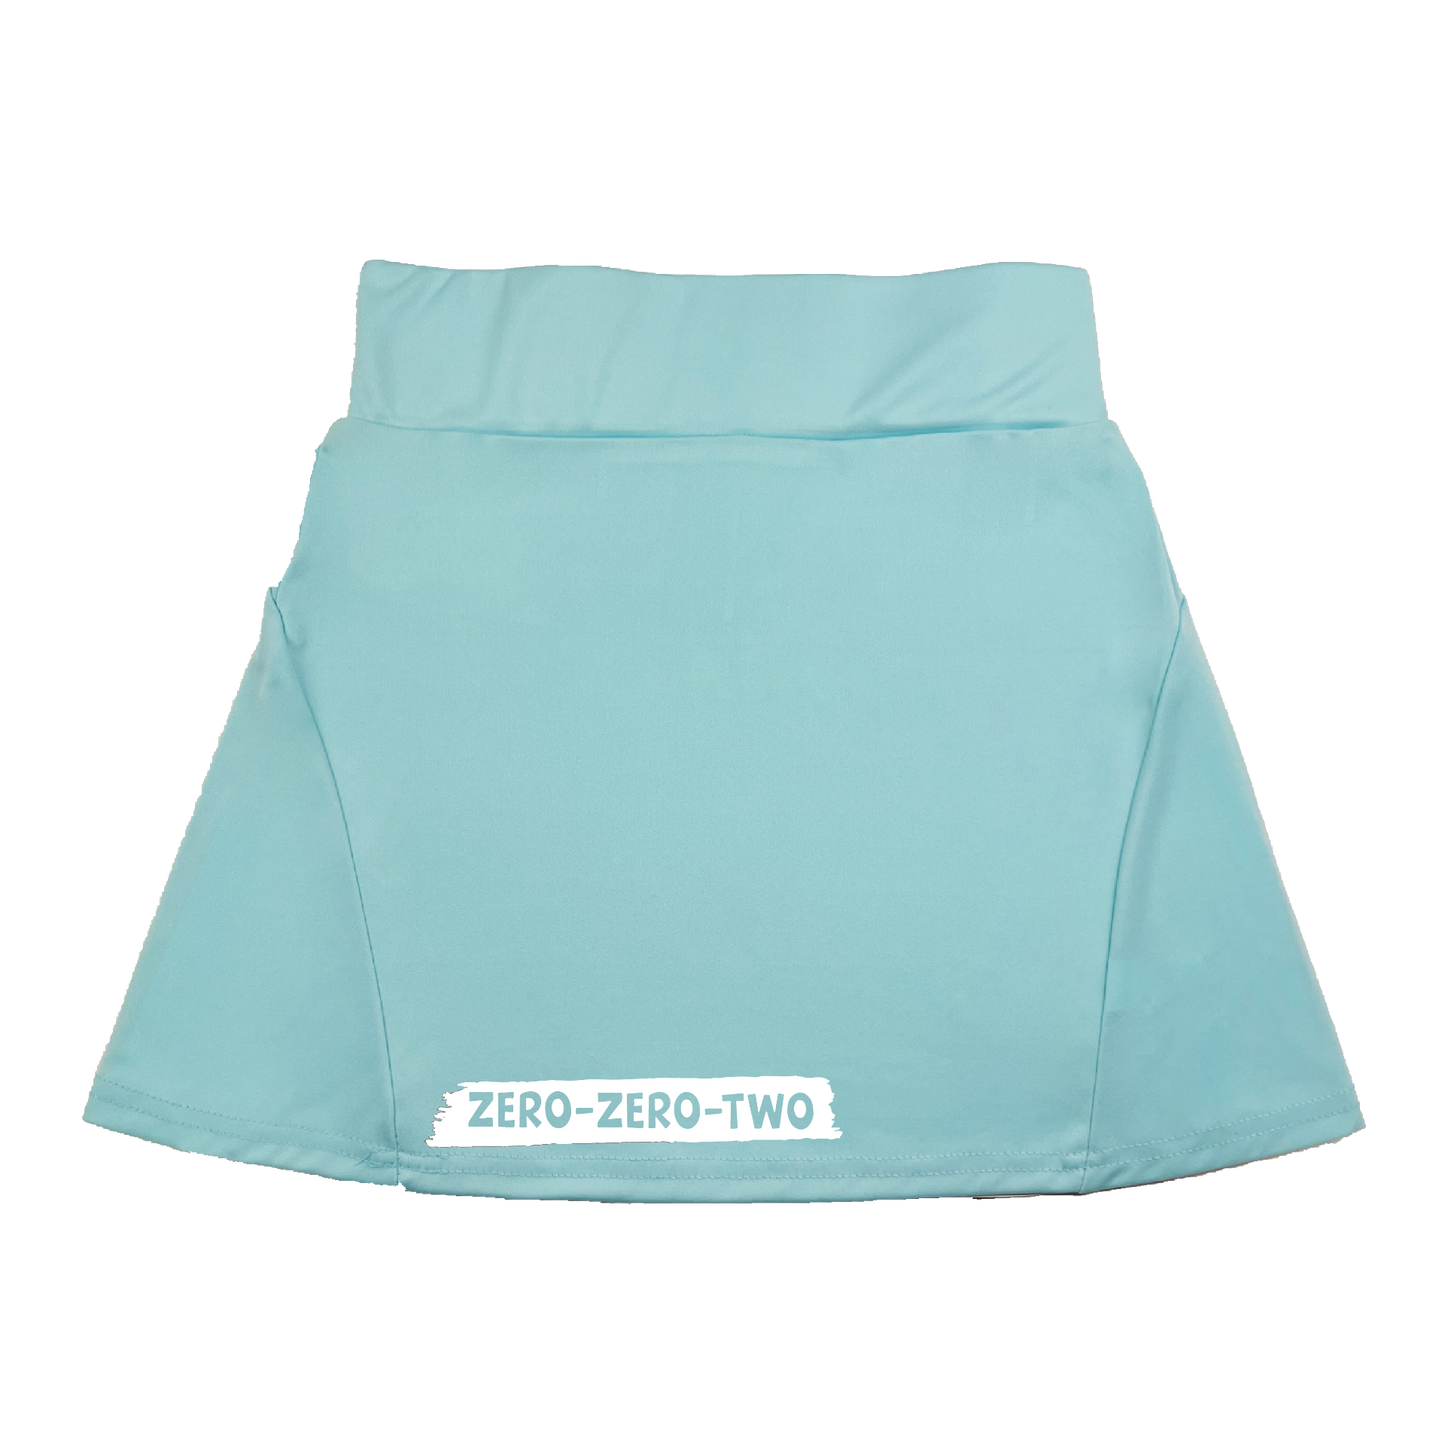 Pickleball Flirty Skort Design:  Zero Zero Two  These flirty skorts have a flat mid-rise waistband with a 3 inch waistband.  Light weight without being see through and the material wicks away moisture quickly.  Flirty pleats in the back with inner shorts for free movement and stylish coverage on the courts.  A functional zipper pocket on the back and two built in pockets on the shorts for convenient storage. 